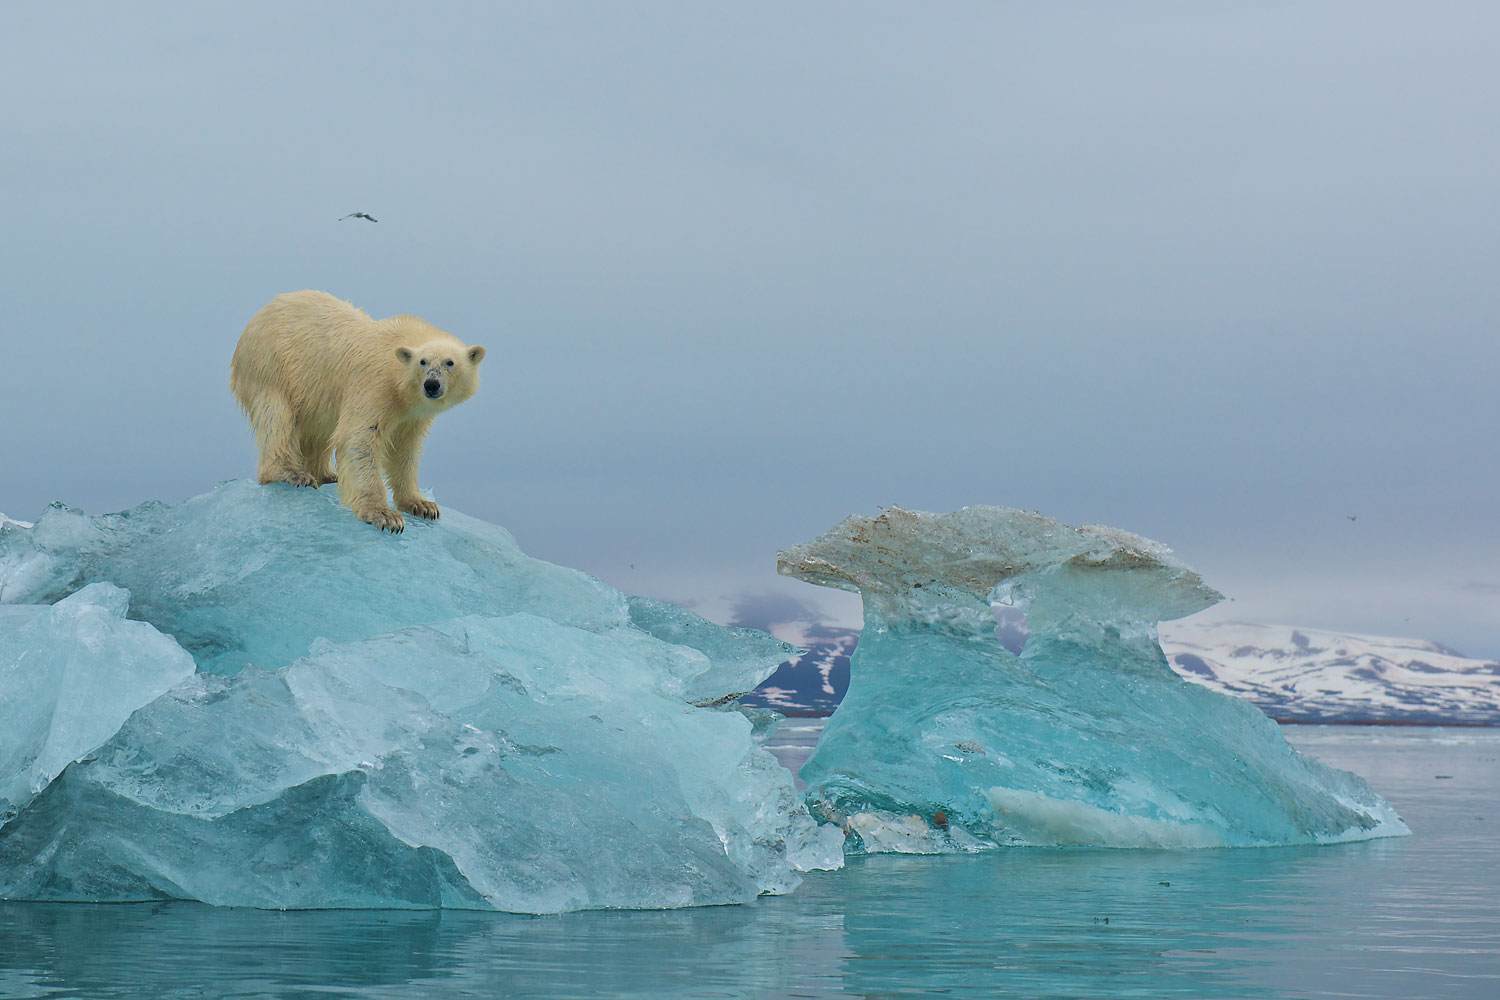 A polar bear scans the surrounding area for seals from the top of a large piece of glacial ice in Liefdefjorden, Svalbard in 2011. (Rebecca Jackrel—Barcroft Media/Getty Images)